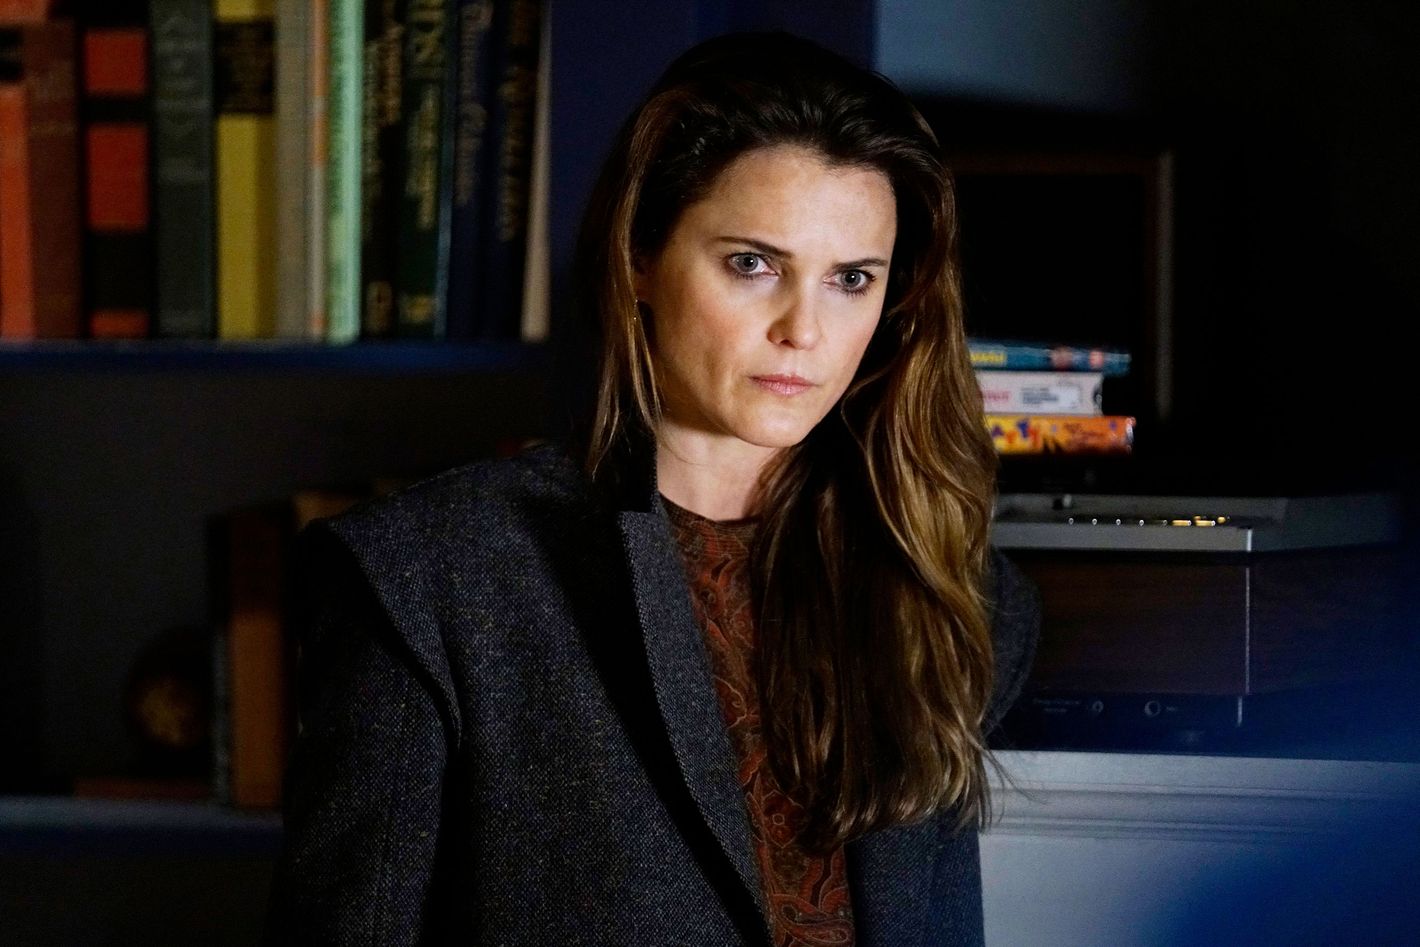 What's Keri Russell hiding under that giant coat?